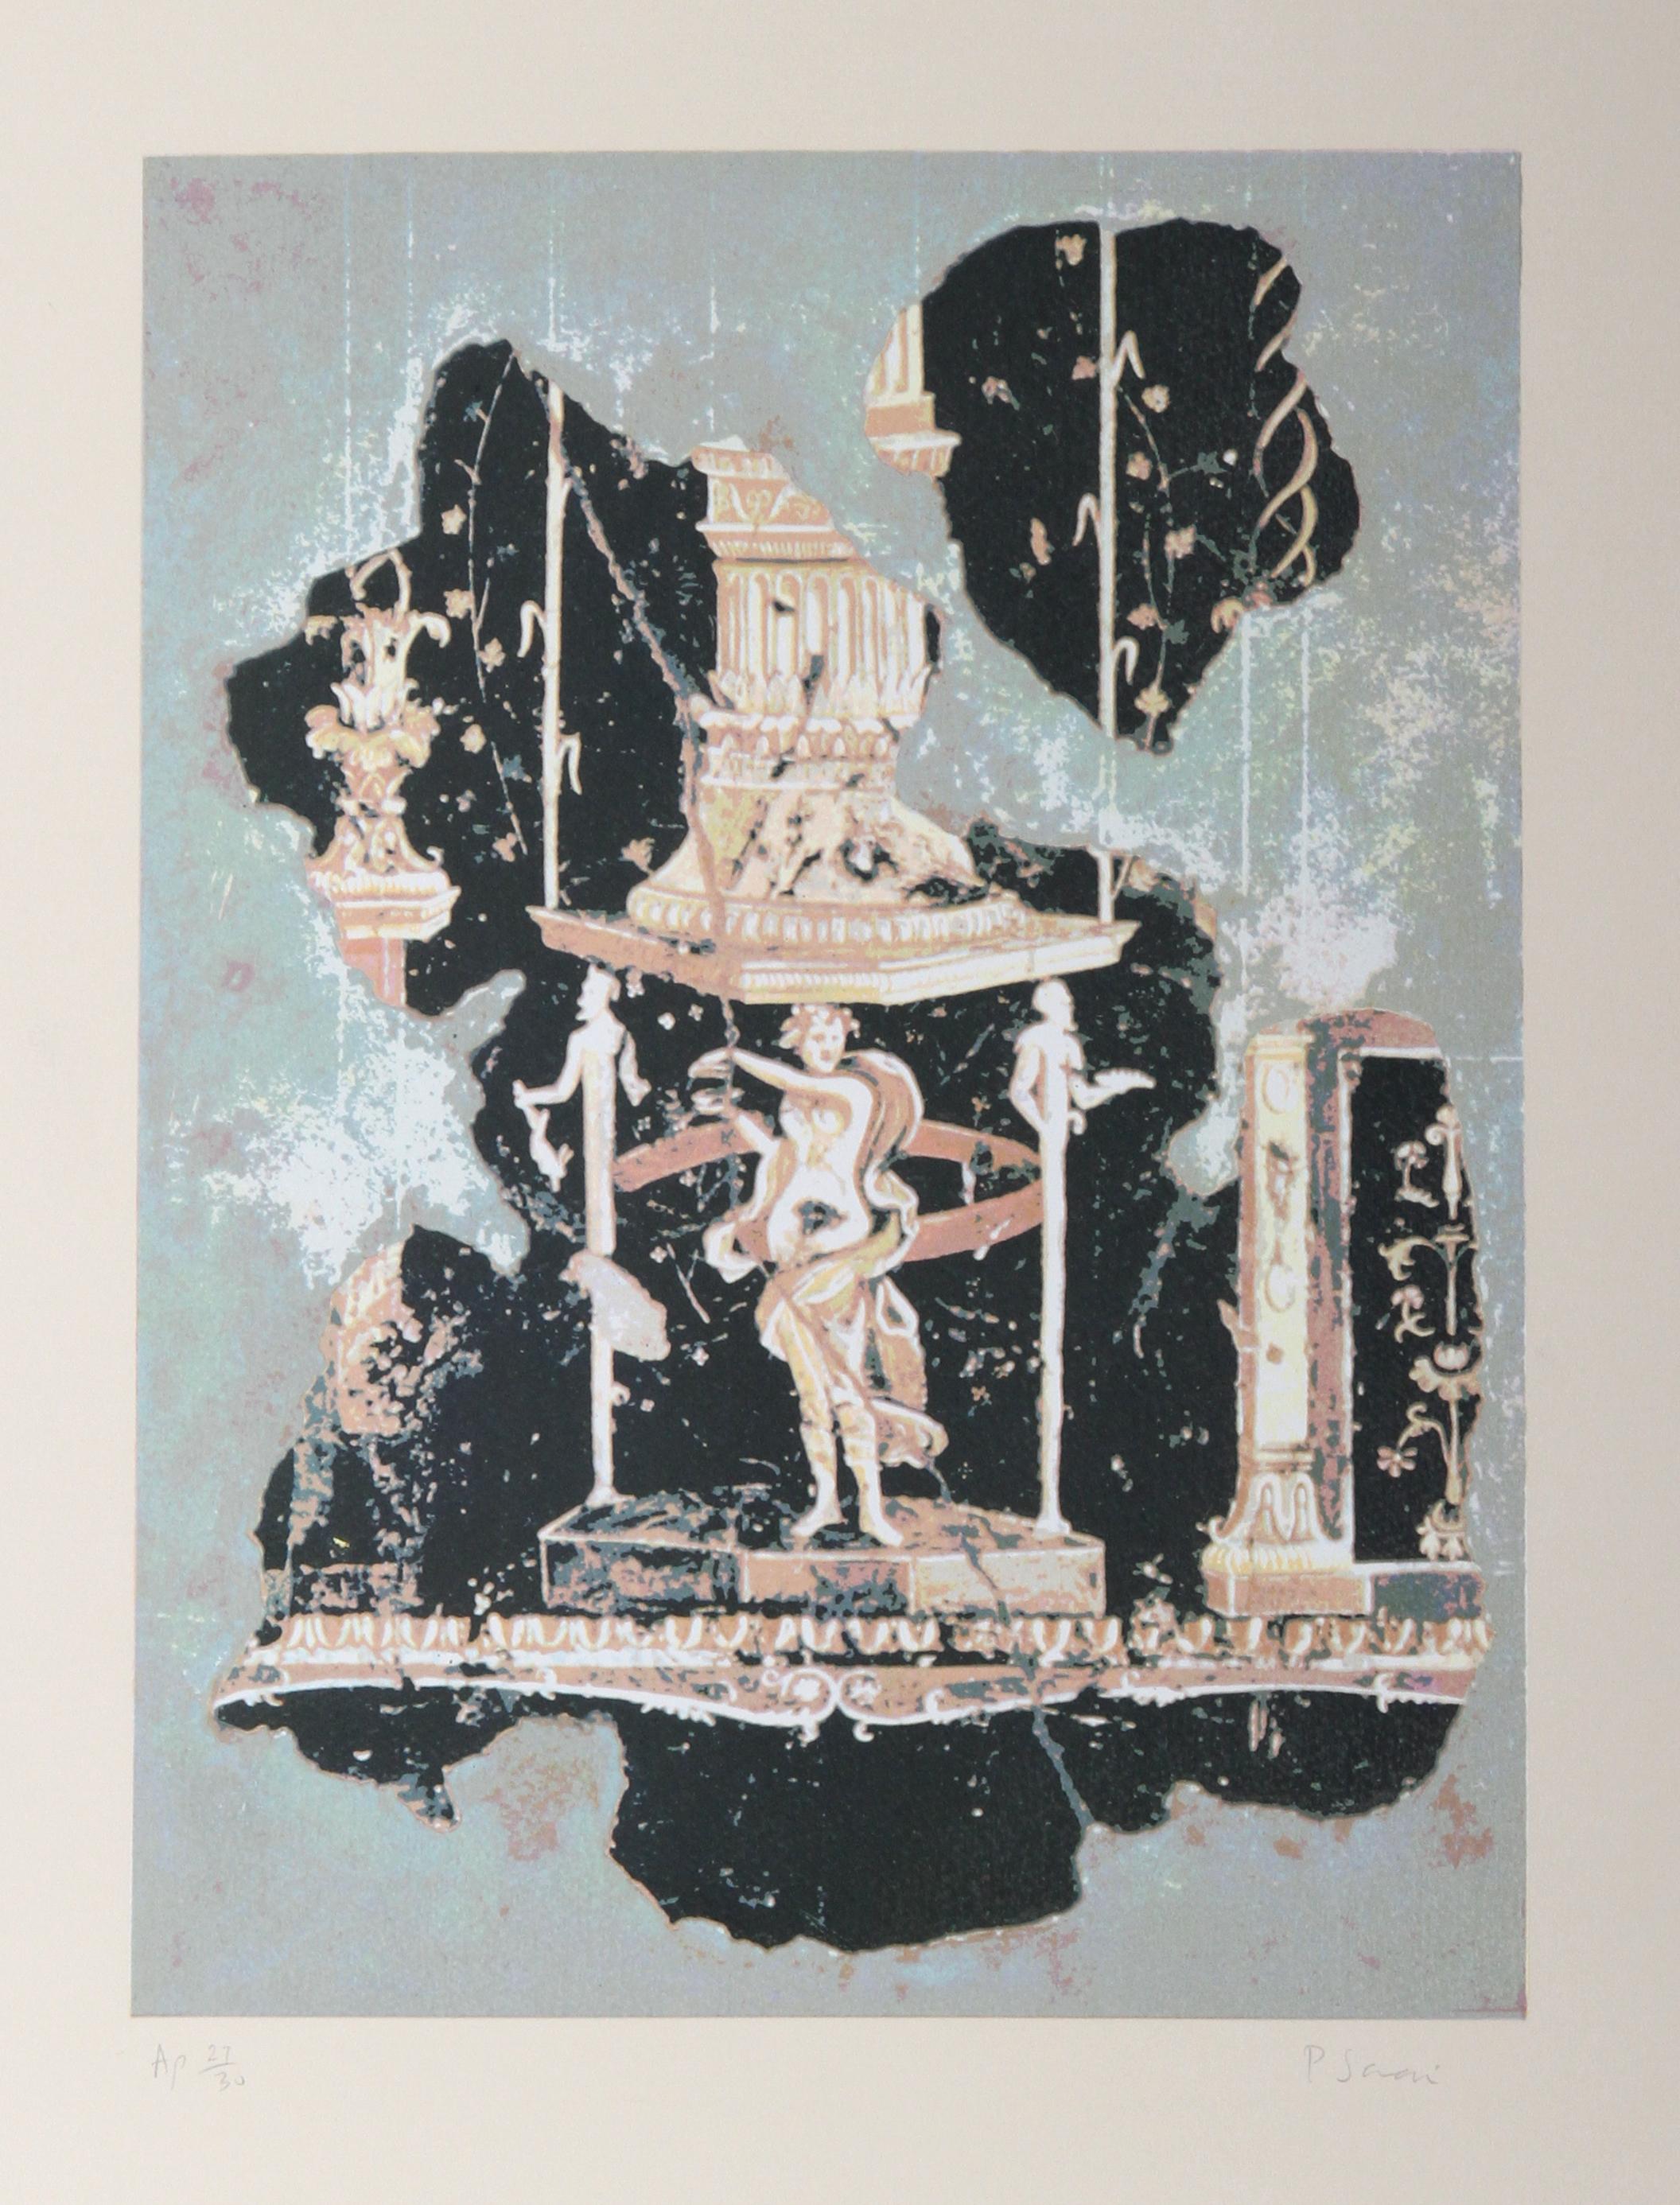 Hellenistic Figure
Peter Saari, American (1951)
Date: circa 1979
Lithograph, signed and numbered in pencil
Edition of AP 30
Image Size: 17 x 13 inches
Size: 27 in. x 21 in. (68.58 cm x 53.34 cm)